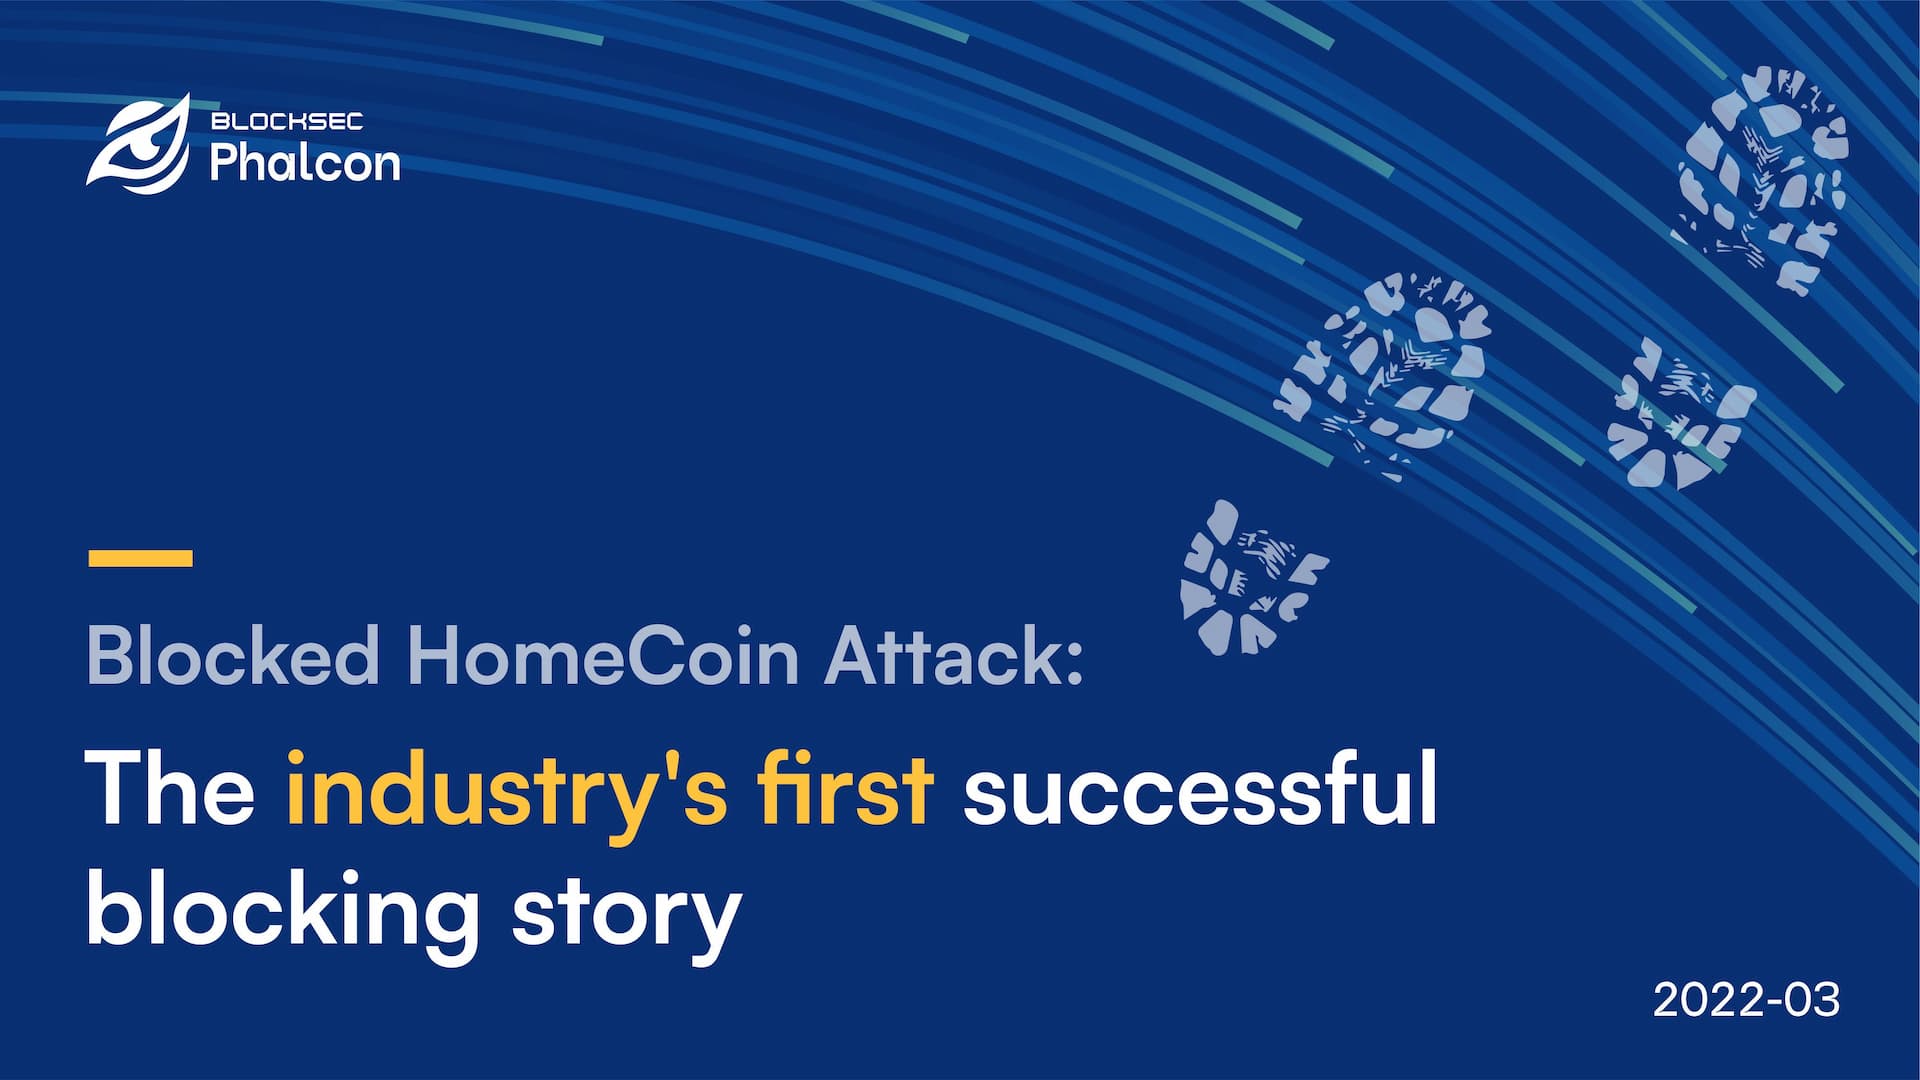 #2 Blocked HomeCoin Attack: Industry's First Successful Blocking Story